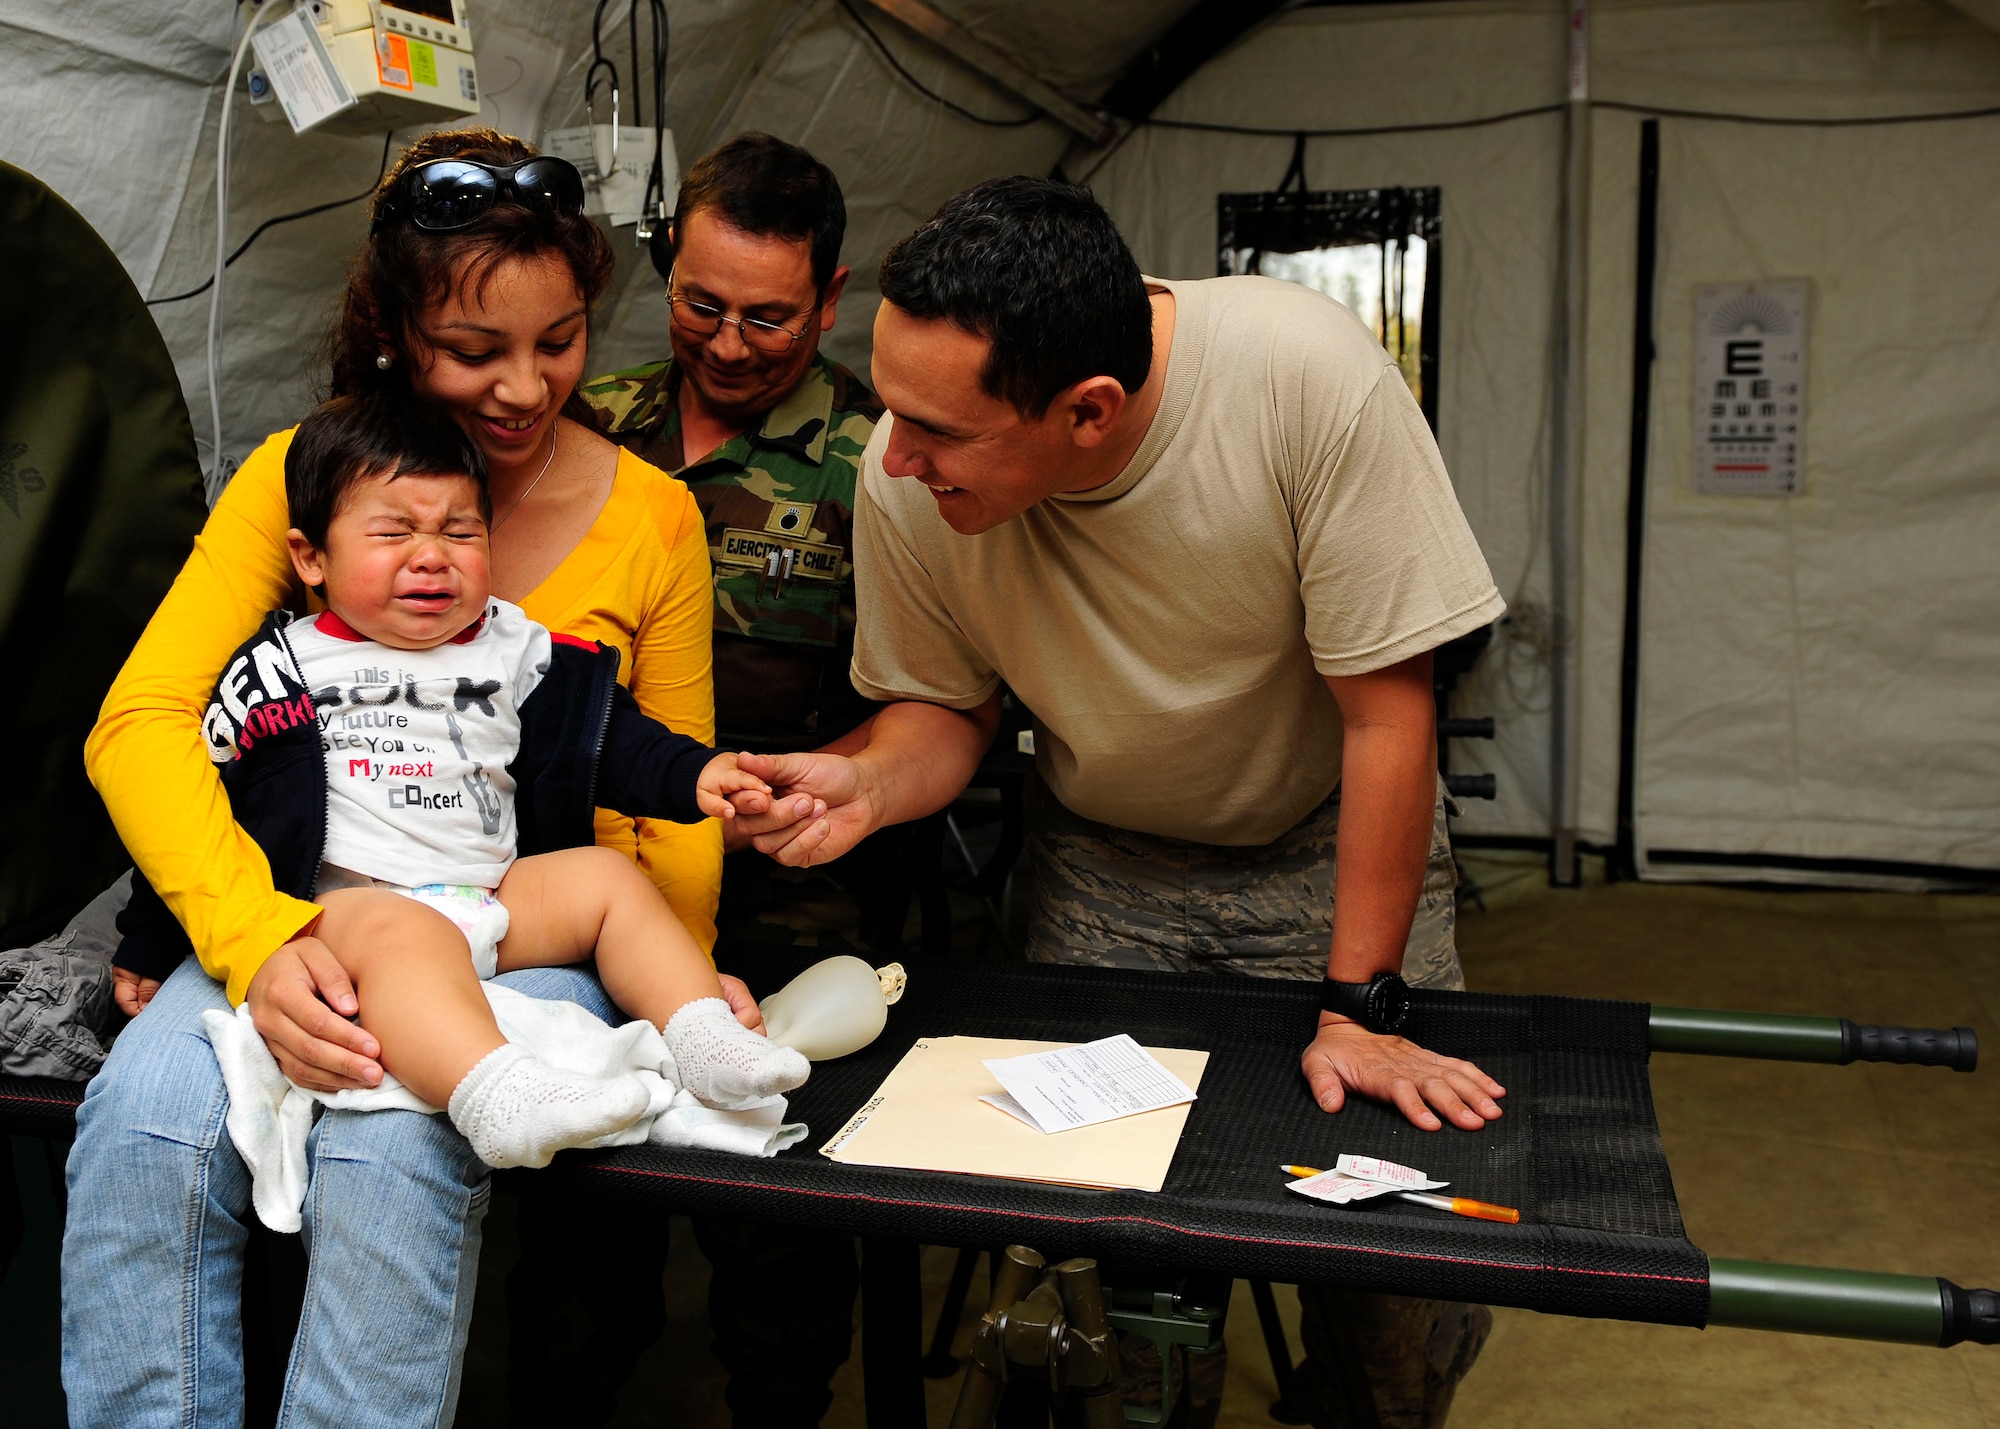 Staff Sgt. Abraham Rodriguez (right) comforts a crying Chilean child at the expeditionary hospital March 14, 2010, in Angol, Chile. Sergeant Rodriguez is a translator for more than 80 members of the Air Force Expeditionary Medical Support Team here. Sergeant Rodriguez is the NCO in charge of Defense Institute for Medical Operations at the Air Force School of Aerospace Medicine at Brooks City-Base, Texas. (U.S. Air Force photo/Senior Airman Tiffany Trojca)